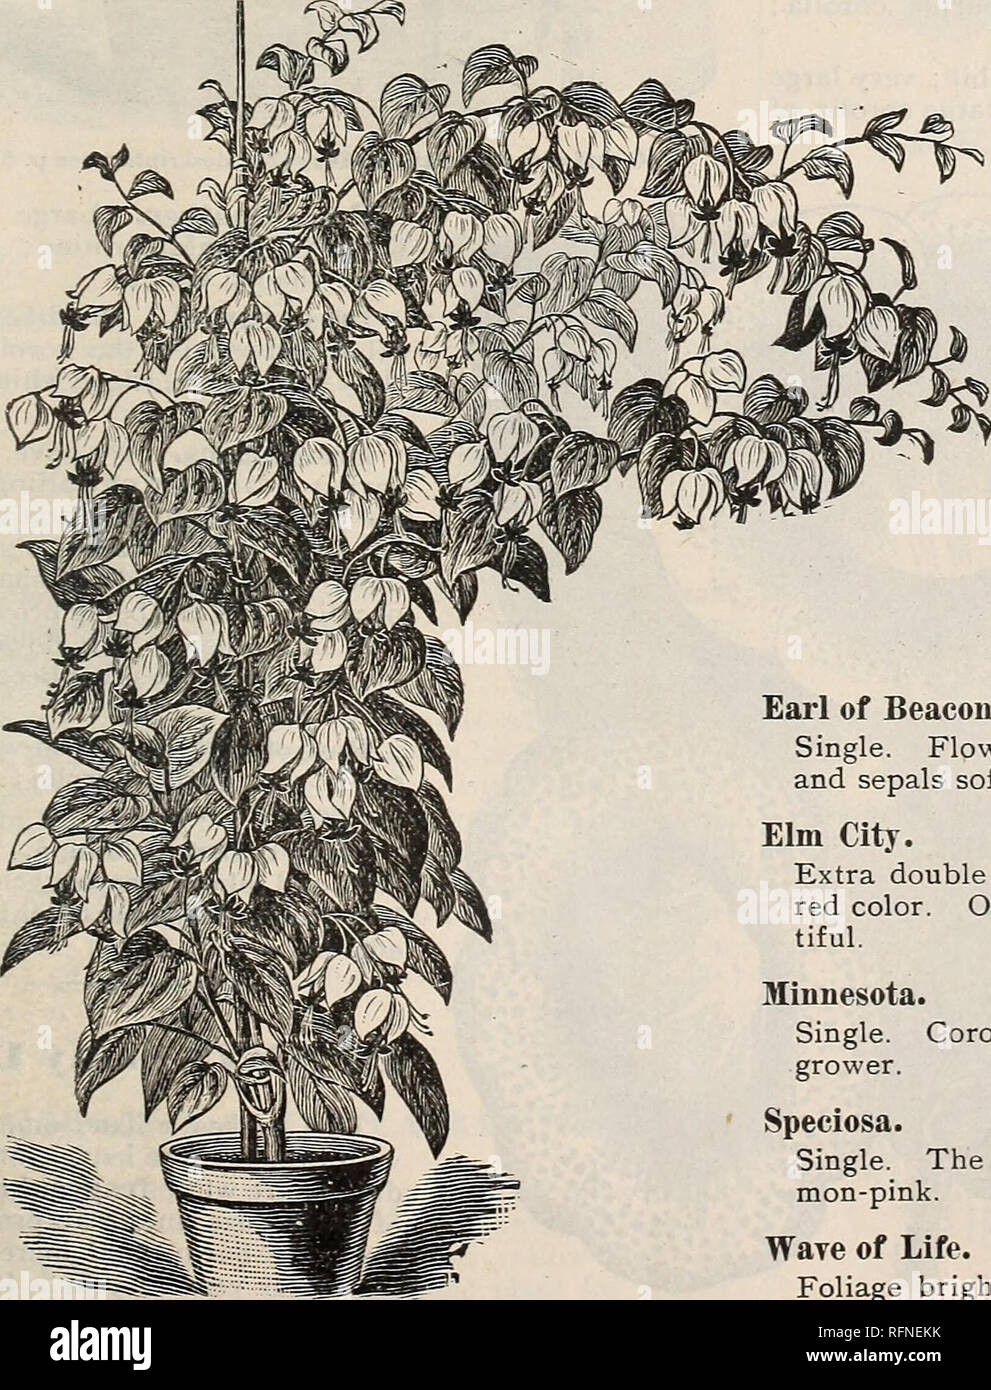 . Catalogue of flowers. Nursery stock Indiana Richmond Catalogs; Flowers Catalogs; Roses Catalogs; Plants, Ornamental Catalogs; Shrubs Catalogs; Vegetables Seeds Catalogs. Illustrated Catalogue of Flowers, 1897. 59 CAMPSIOIUM FILICIFOUUM. An elegant climbing plant ; suitable for pot. culture or for out-door bedding on a small trellis ; its light, graceful habit has given it the popular name of &quot;Climbing Fern.&quot; Of very easy culture. 10 cents. CYPERUS ALTERNIFOLIUS. (Umbrella Plant.) A splendid aquatic plant, throwing up stems two to three feet high, surmounted at the top with a whorl  Stock Photo